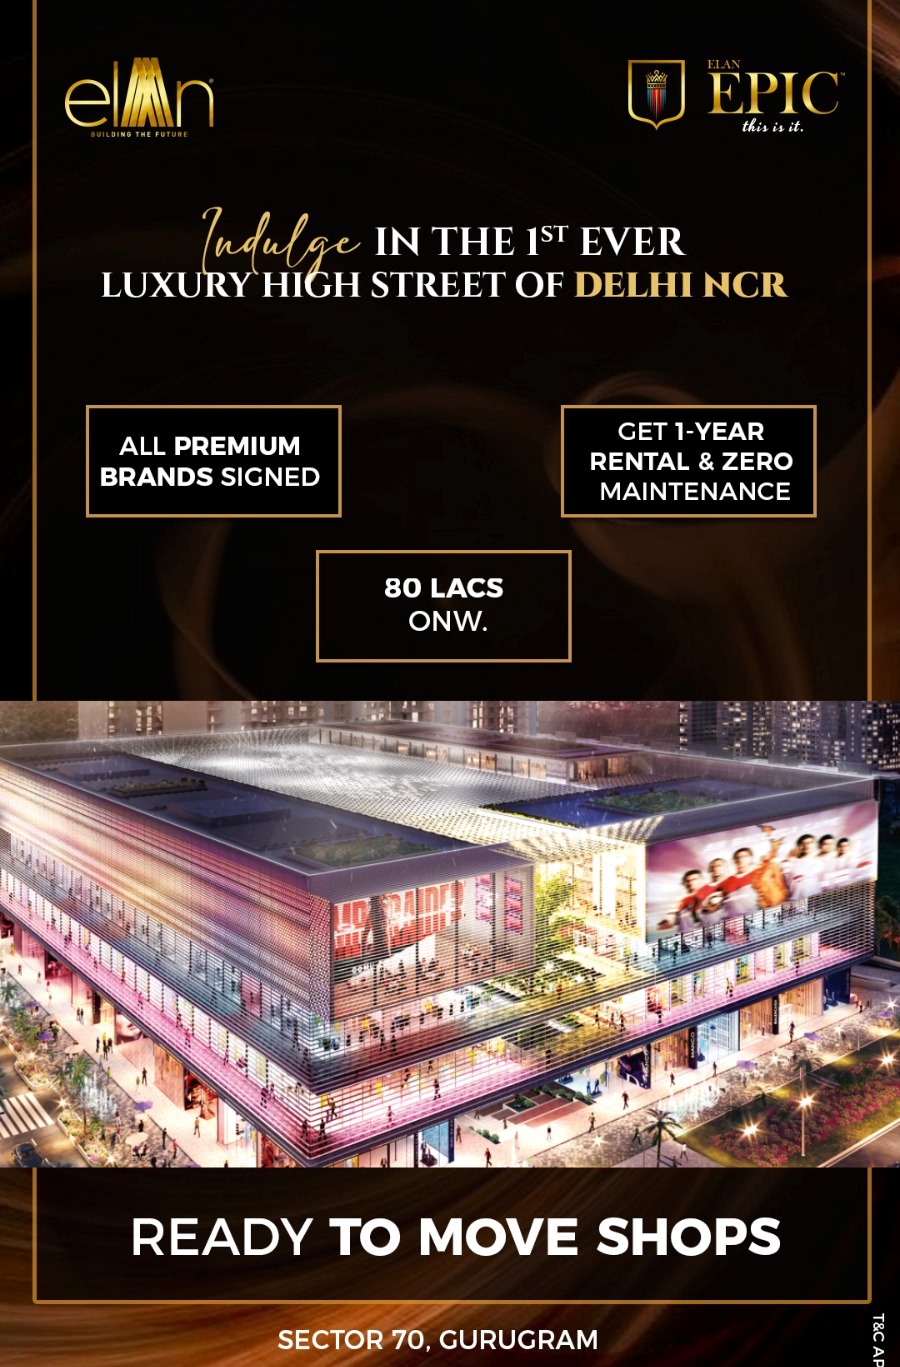 Ready to move shops Rs 80 Lac onwards at Elan Epic in Sector 70, Gurgaon Update